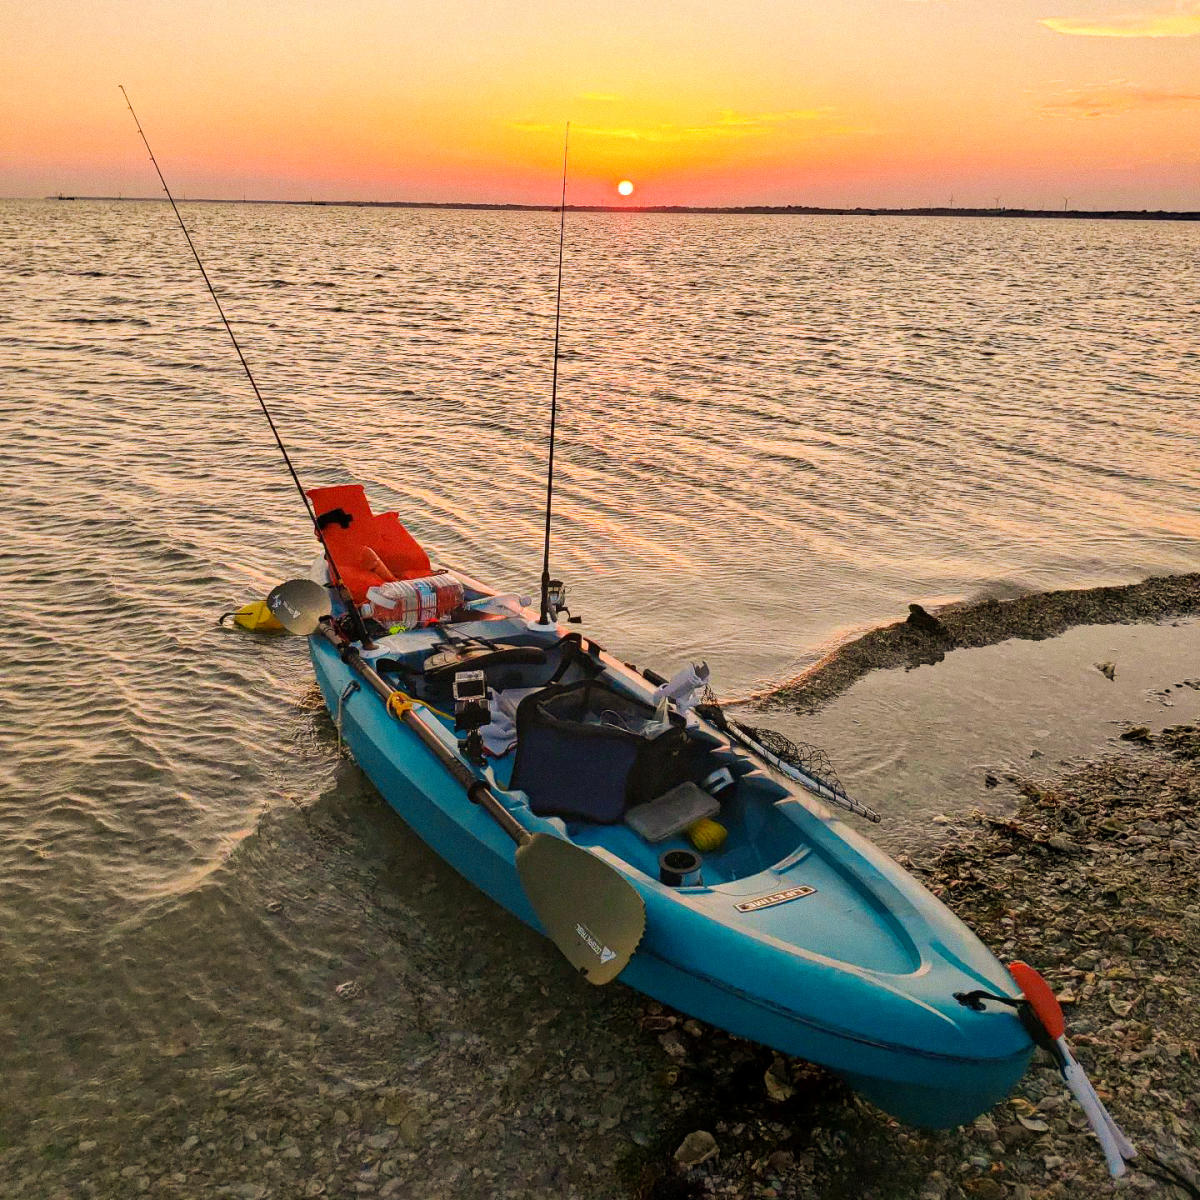 Boat Rentals & Tackle Shops in Corpus Christi, Texas